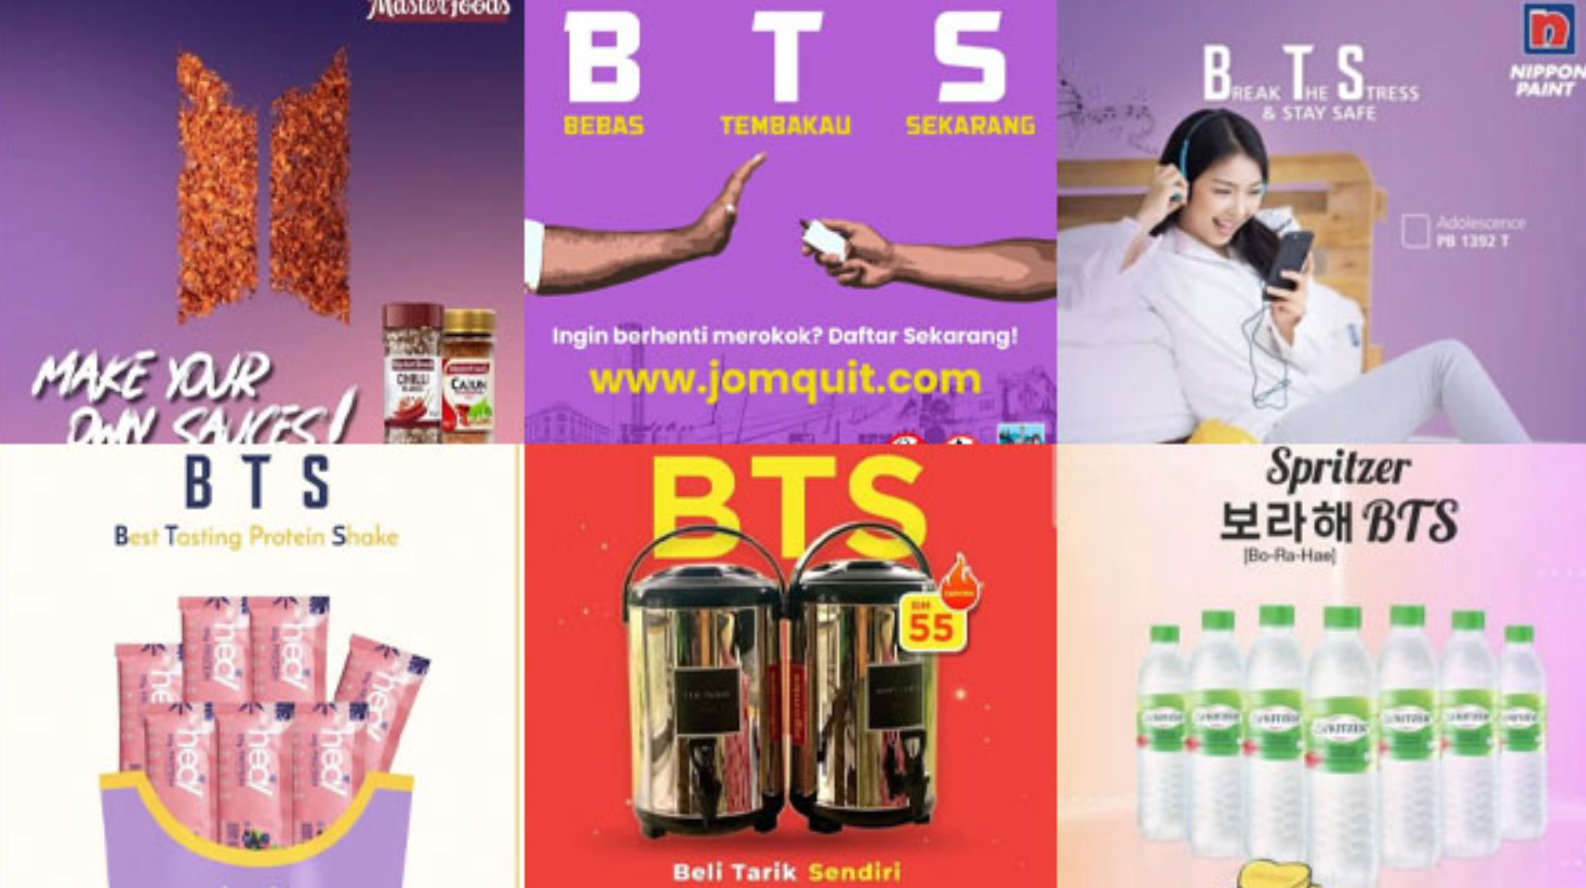 Companies begin capitalizing off the BTS brand and name - DAILY NAVER